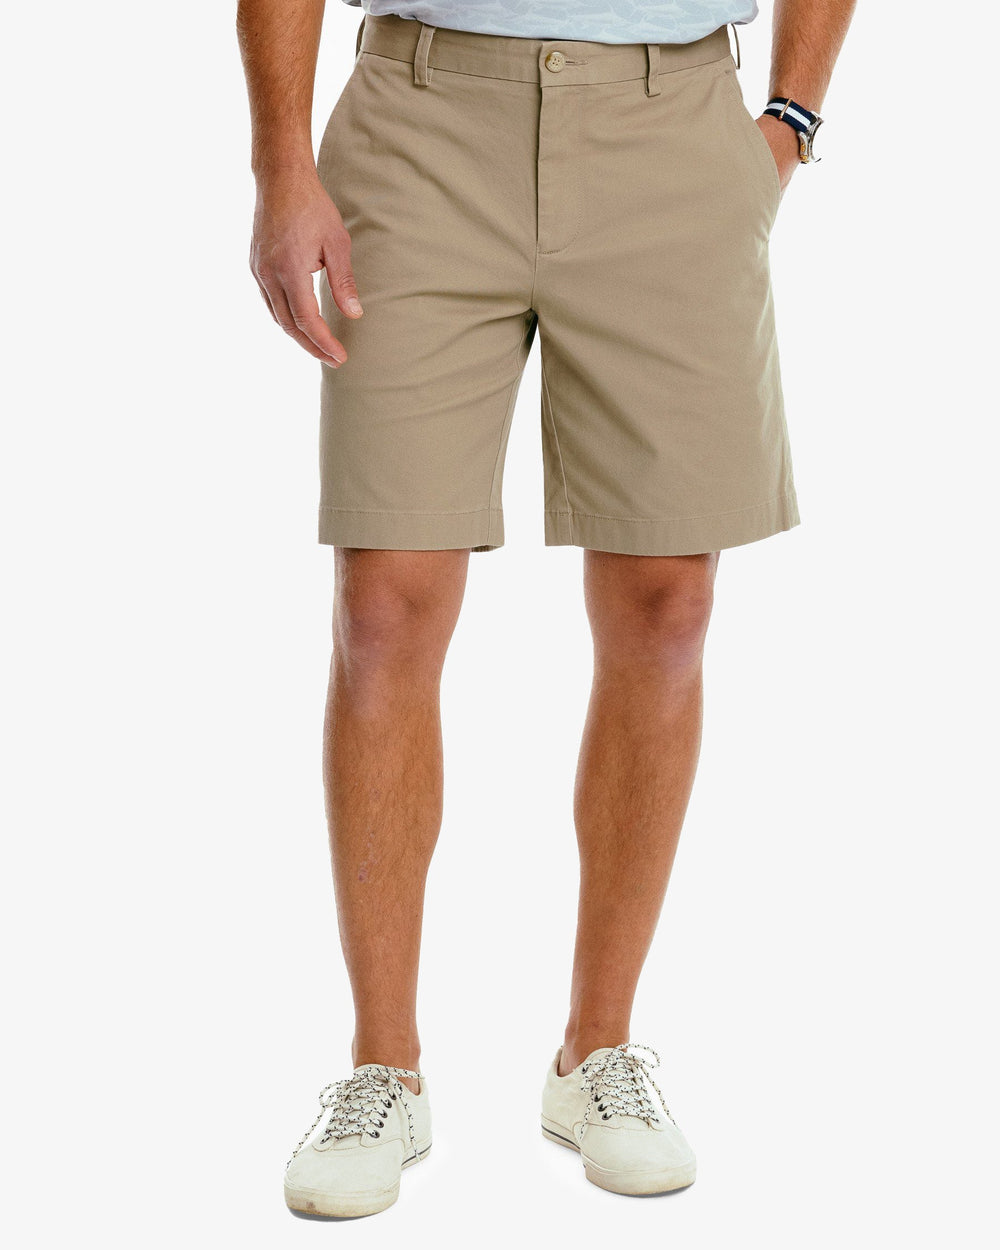 The front view of the Men's New Channel Marker 9 Inch Short by Southern Tide - Sandstone Khaki